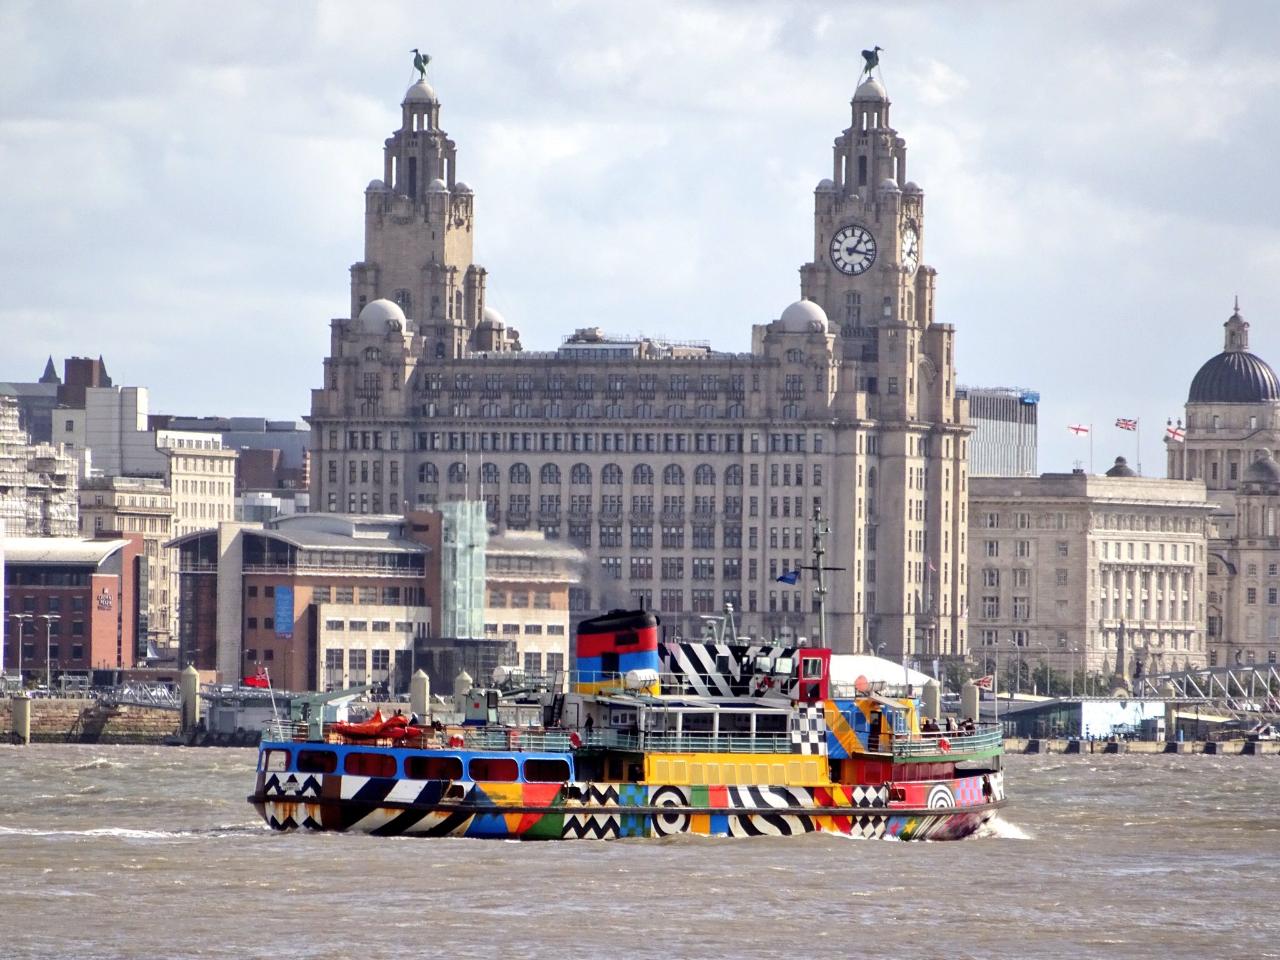 Tour & River Cruise of Liverpool, Port Sunlight & Medieval Chester